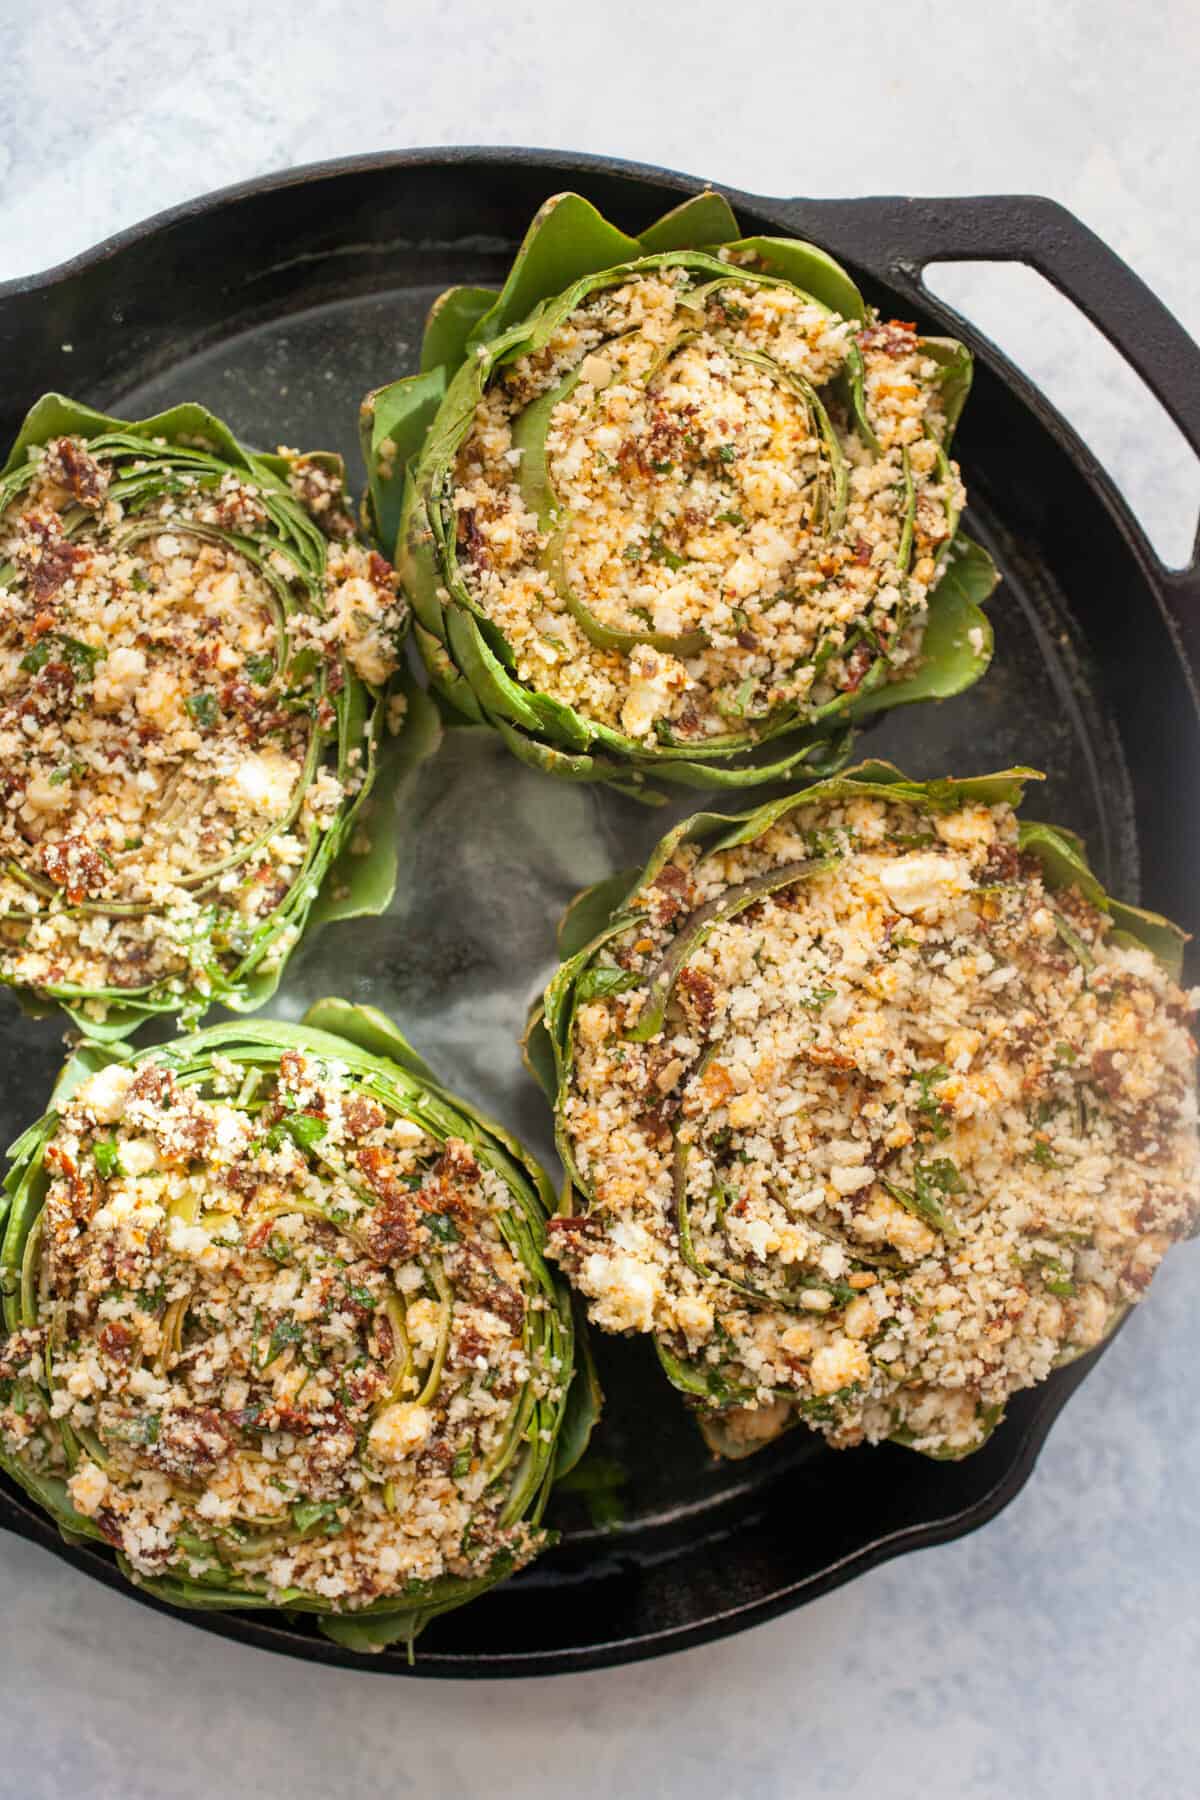 Stuffed Artichokes: These roasted artichokes are stuffed with a mix of delicious flavors like sun-dried tomatoes, feta, and basil. What a great appetizer! | macheesmo.com